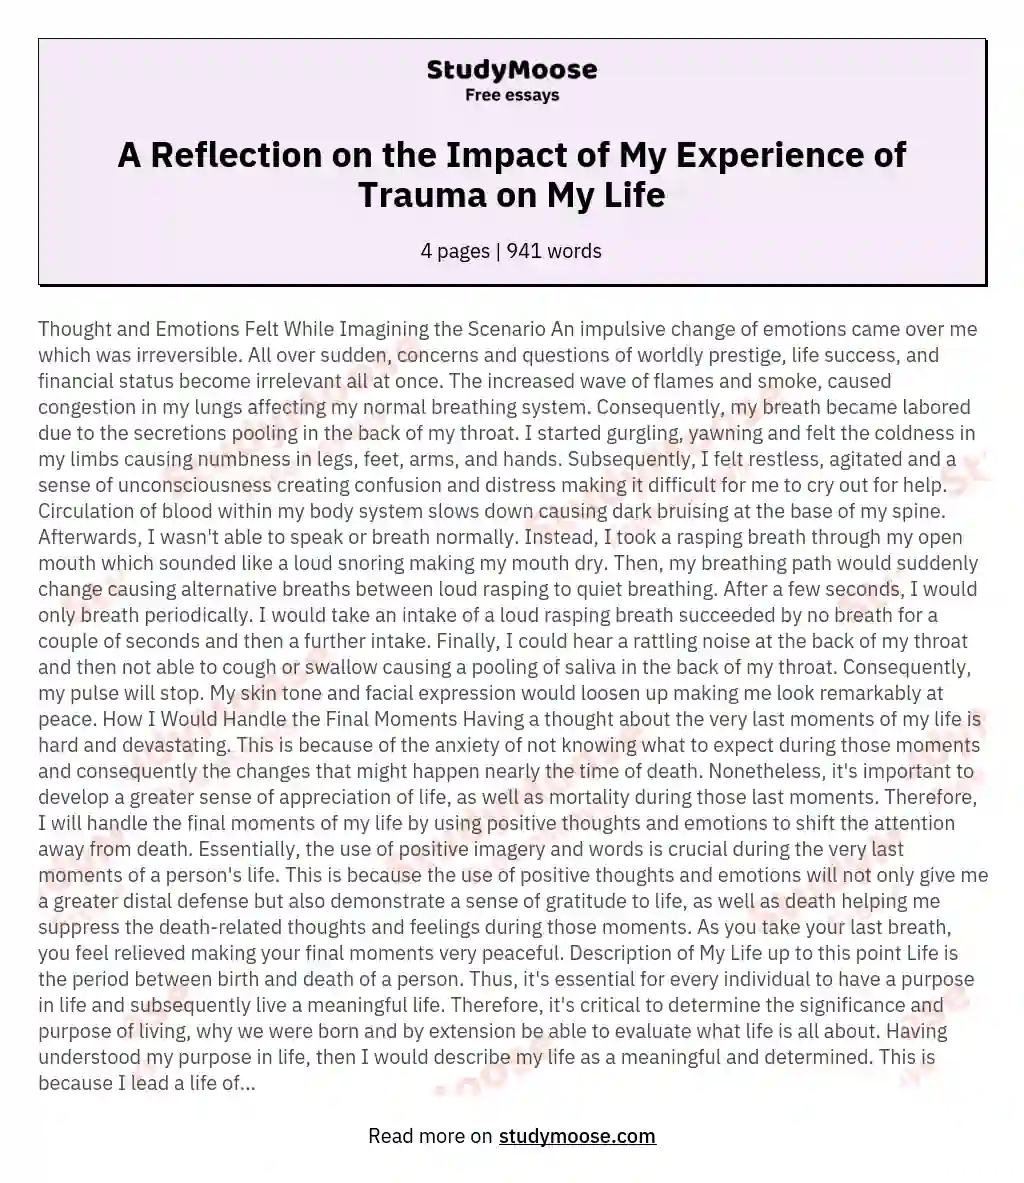 A Reflection on the Impact of My Experience of Trauma on My Life essay